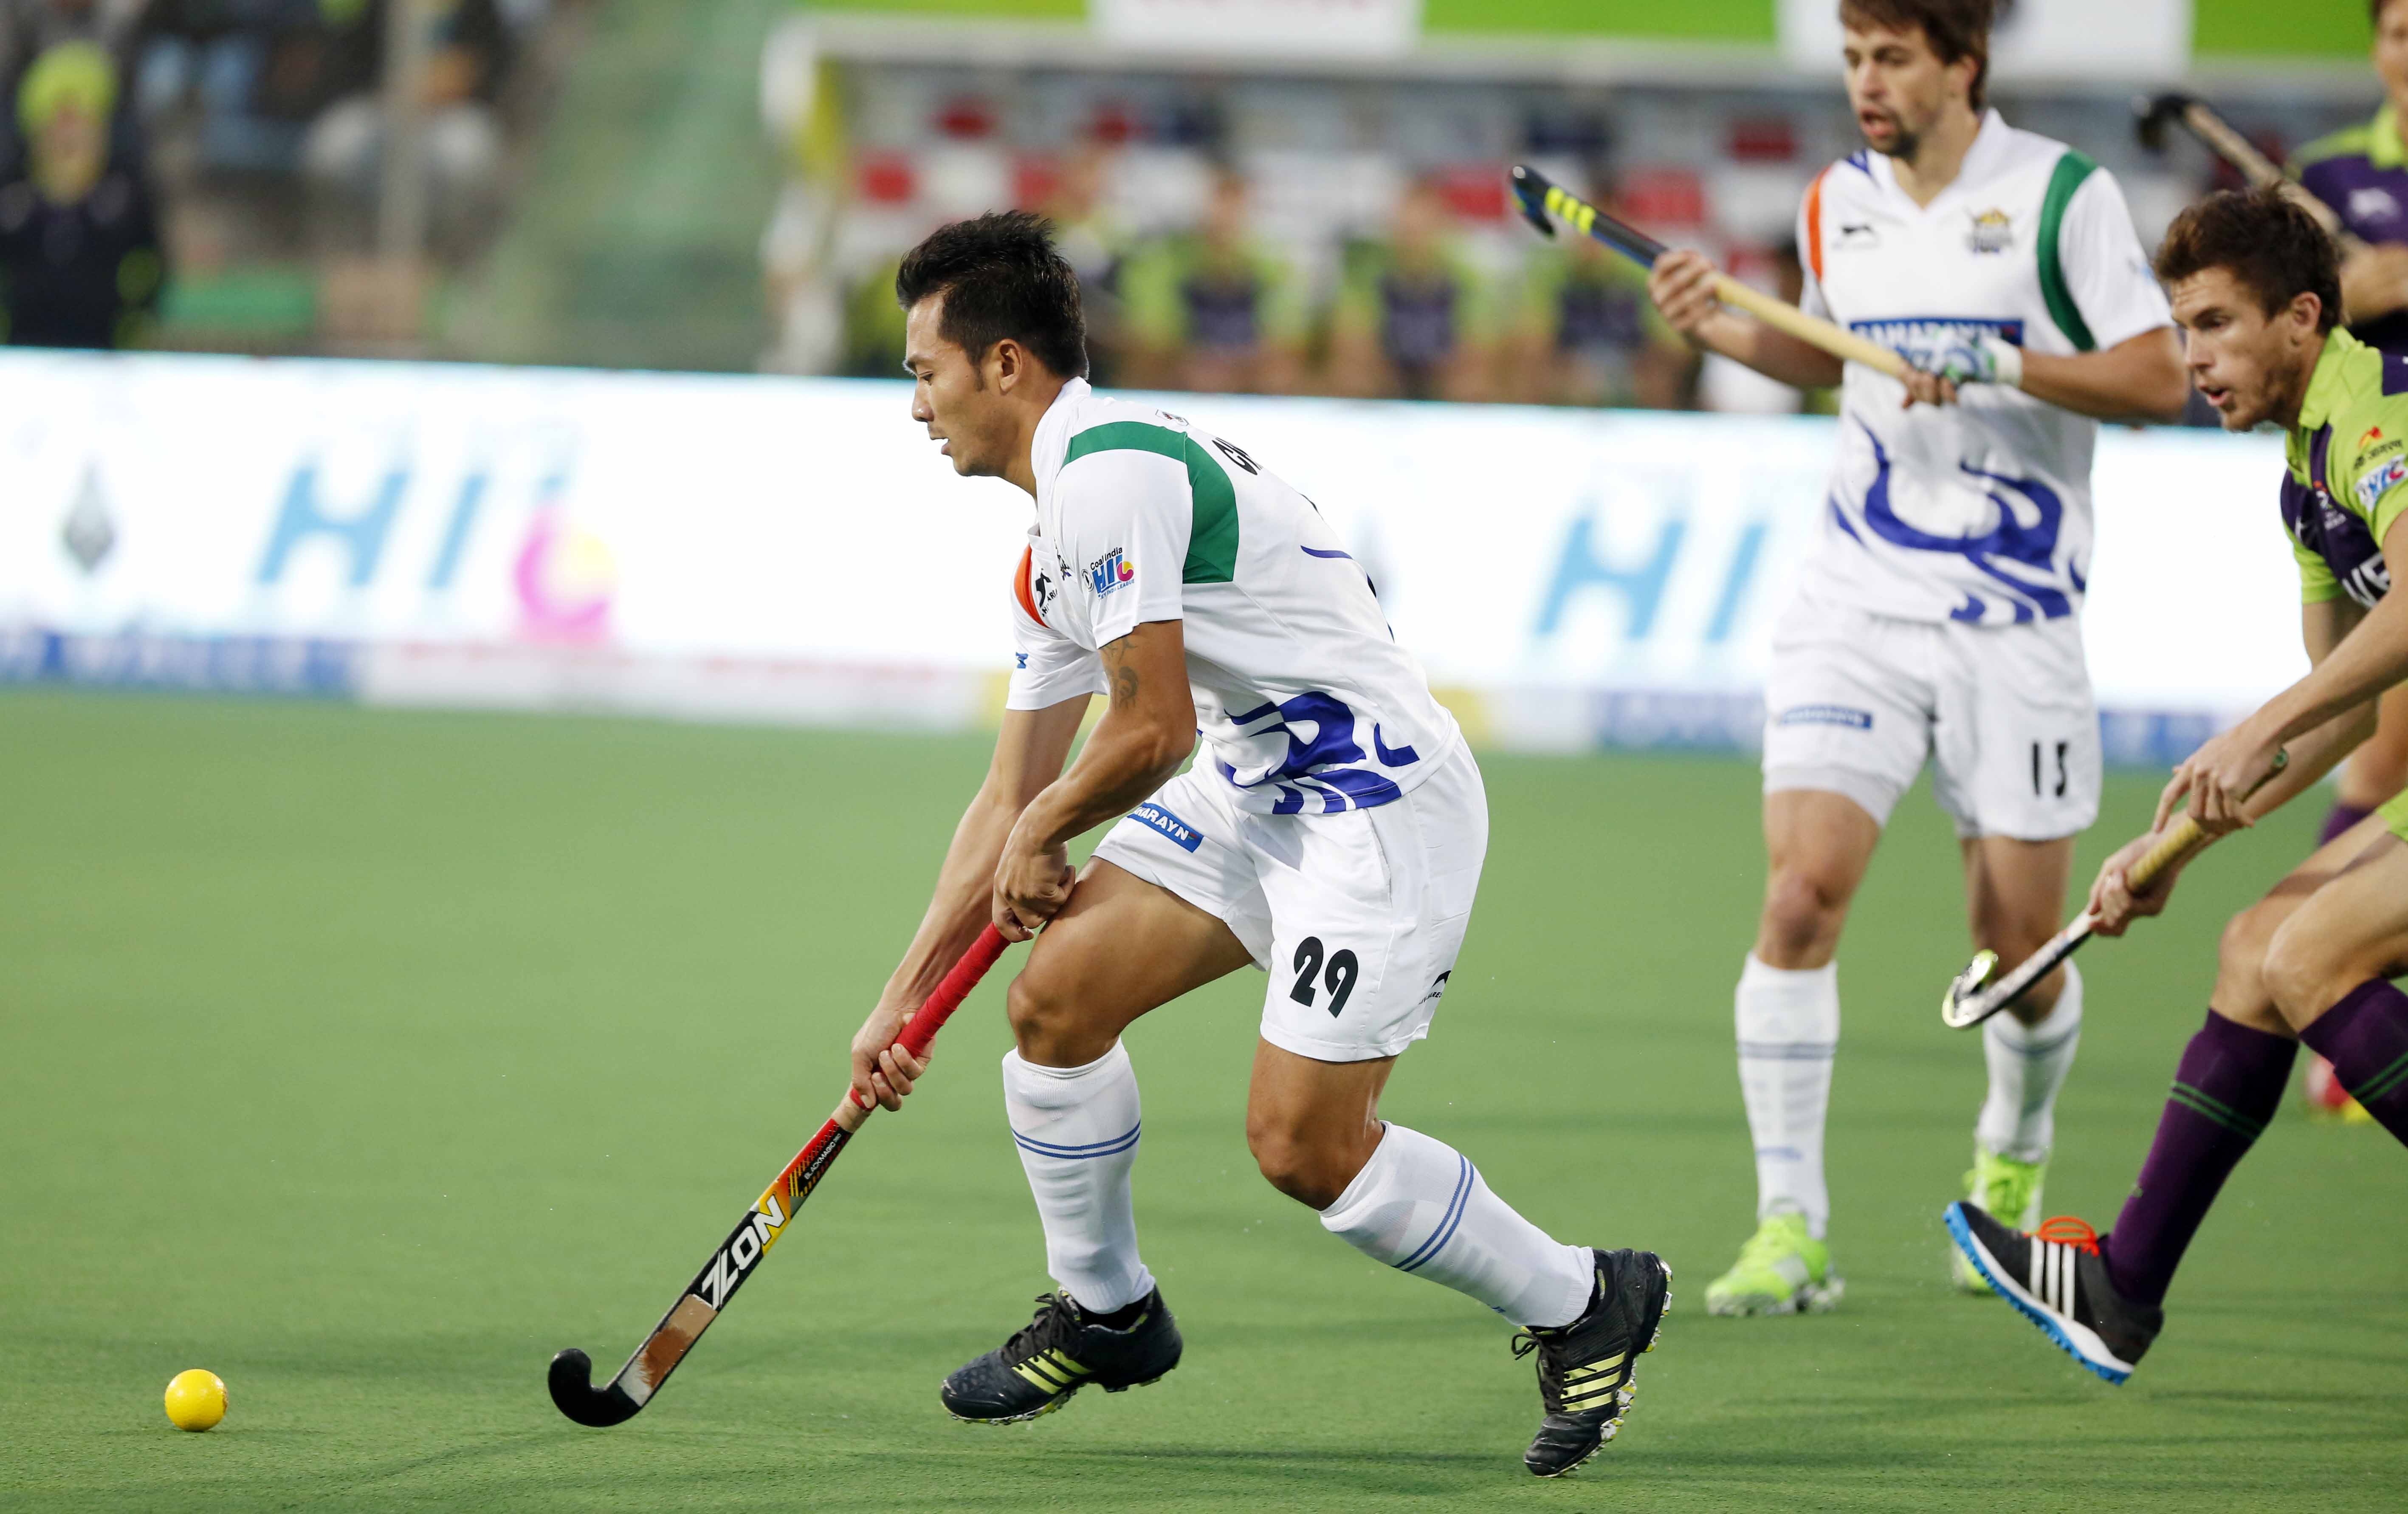 HIL 2016: UP survives late surge from Delhi to register second win of season.